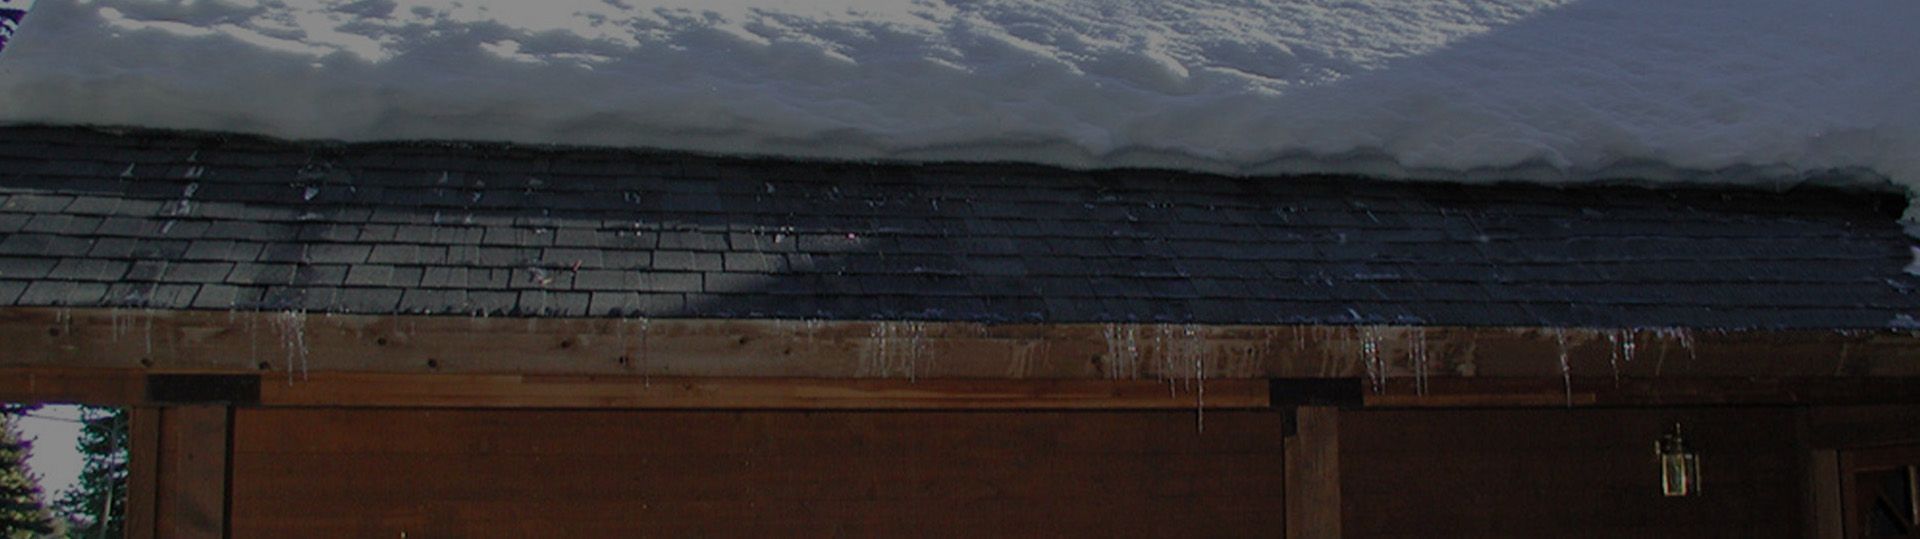 Self-regulating heat cable for roof de-icing banner